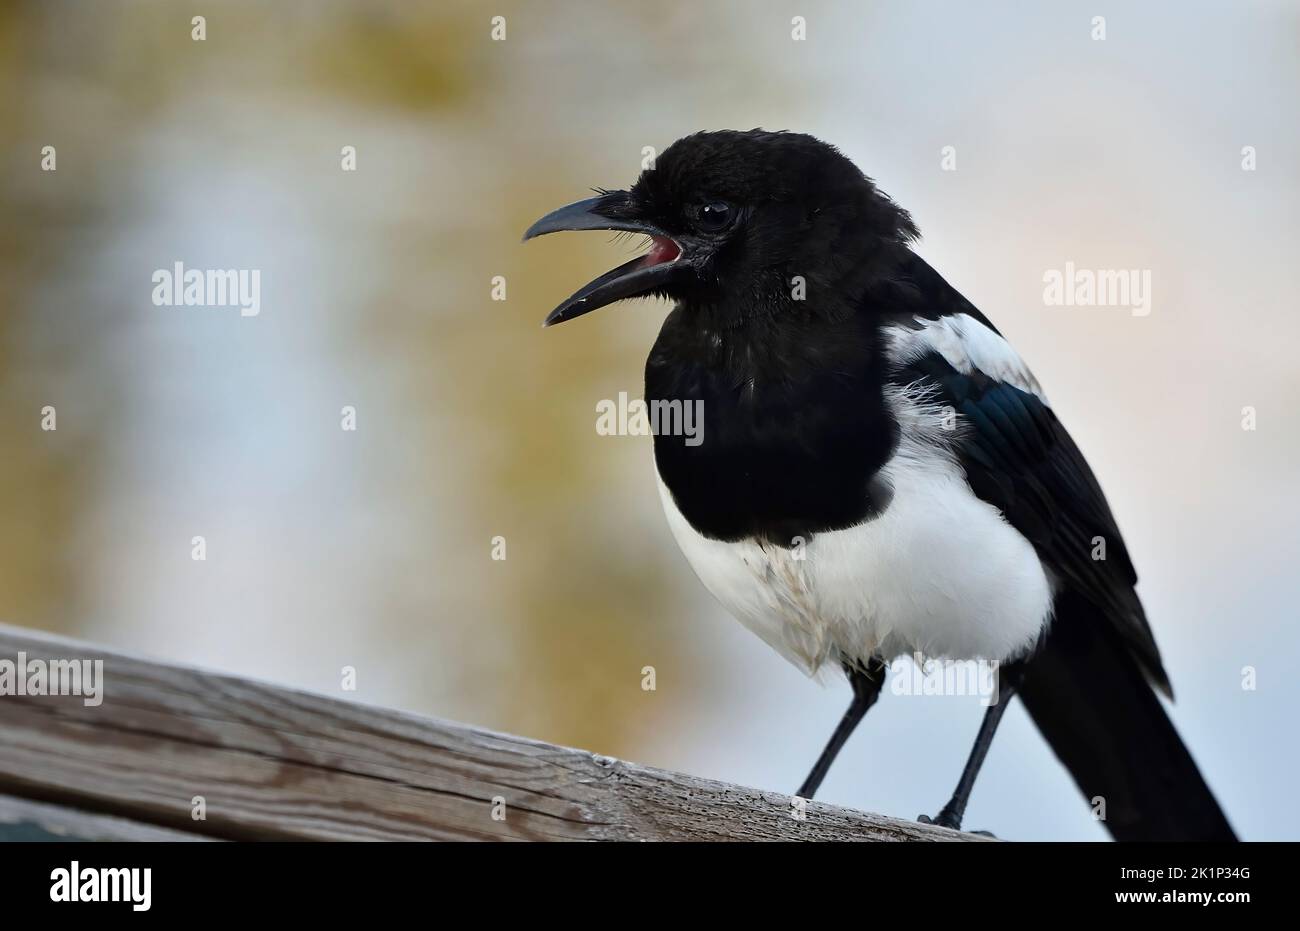 A wild juvenile Magpie bird 'Pica pica', being vocal to attract his parents Stock Photo